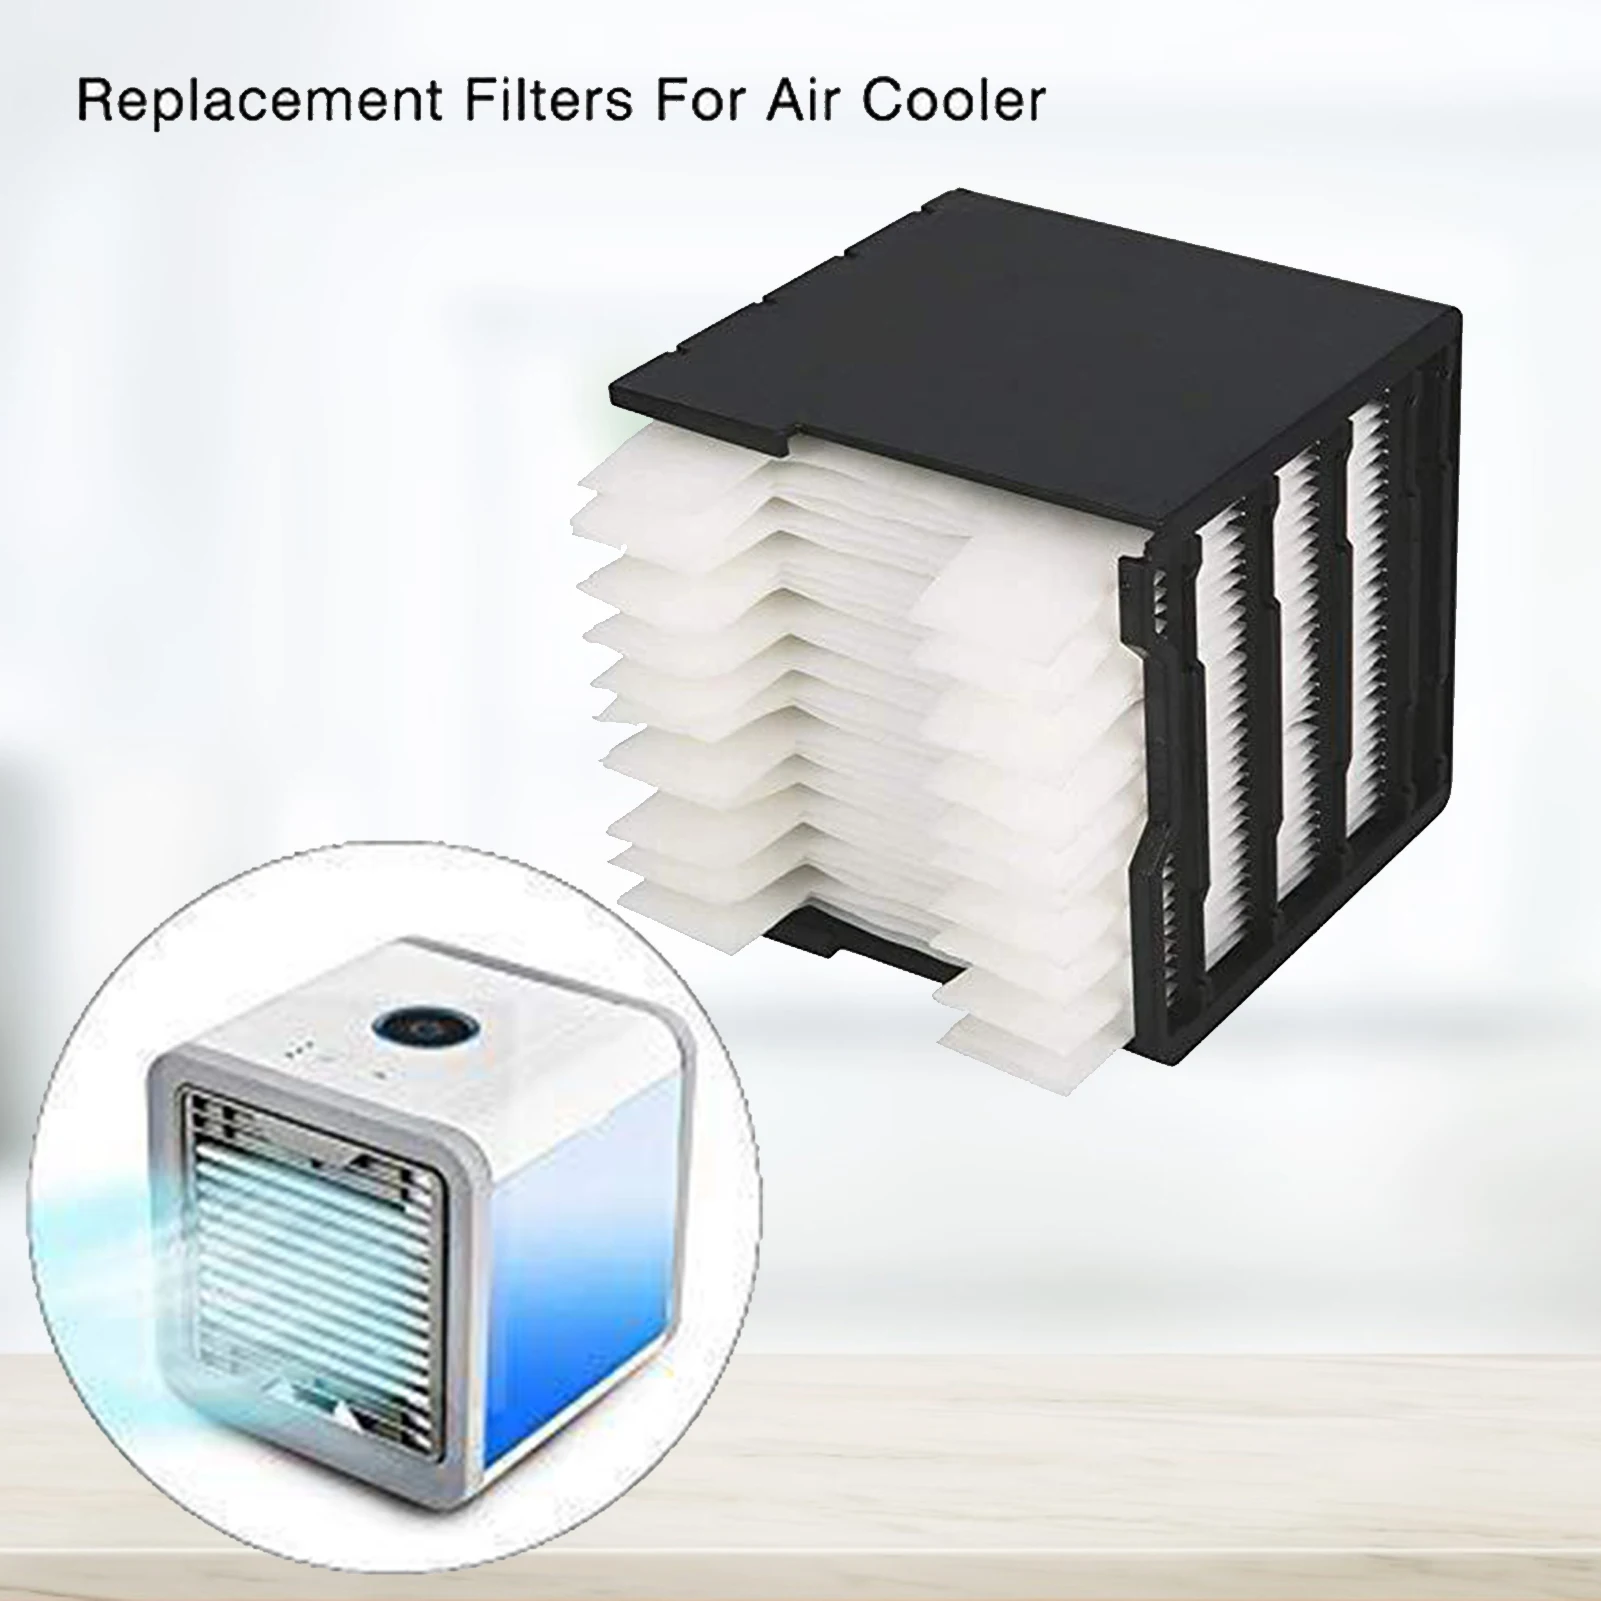 

30pcs Air Conditioner Fan Filter Replacement For Arctic Cold Fan Mini Home Office Desk Humidifier Air Cooler Accessories